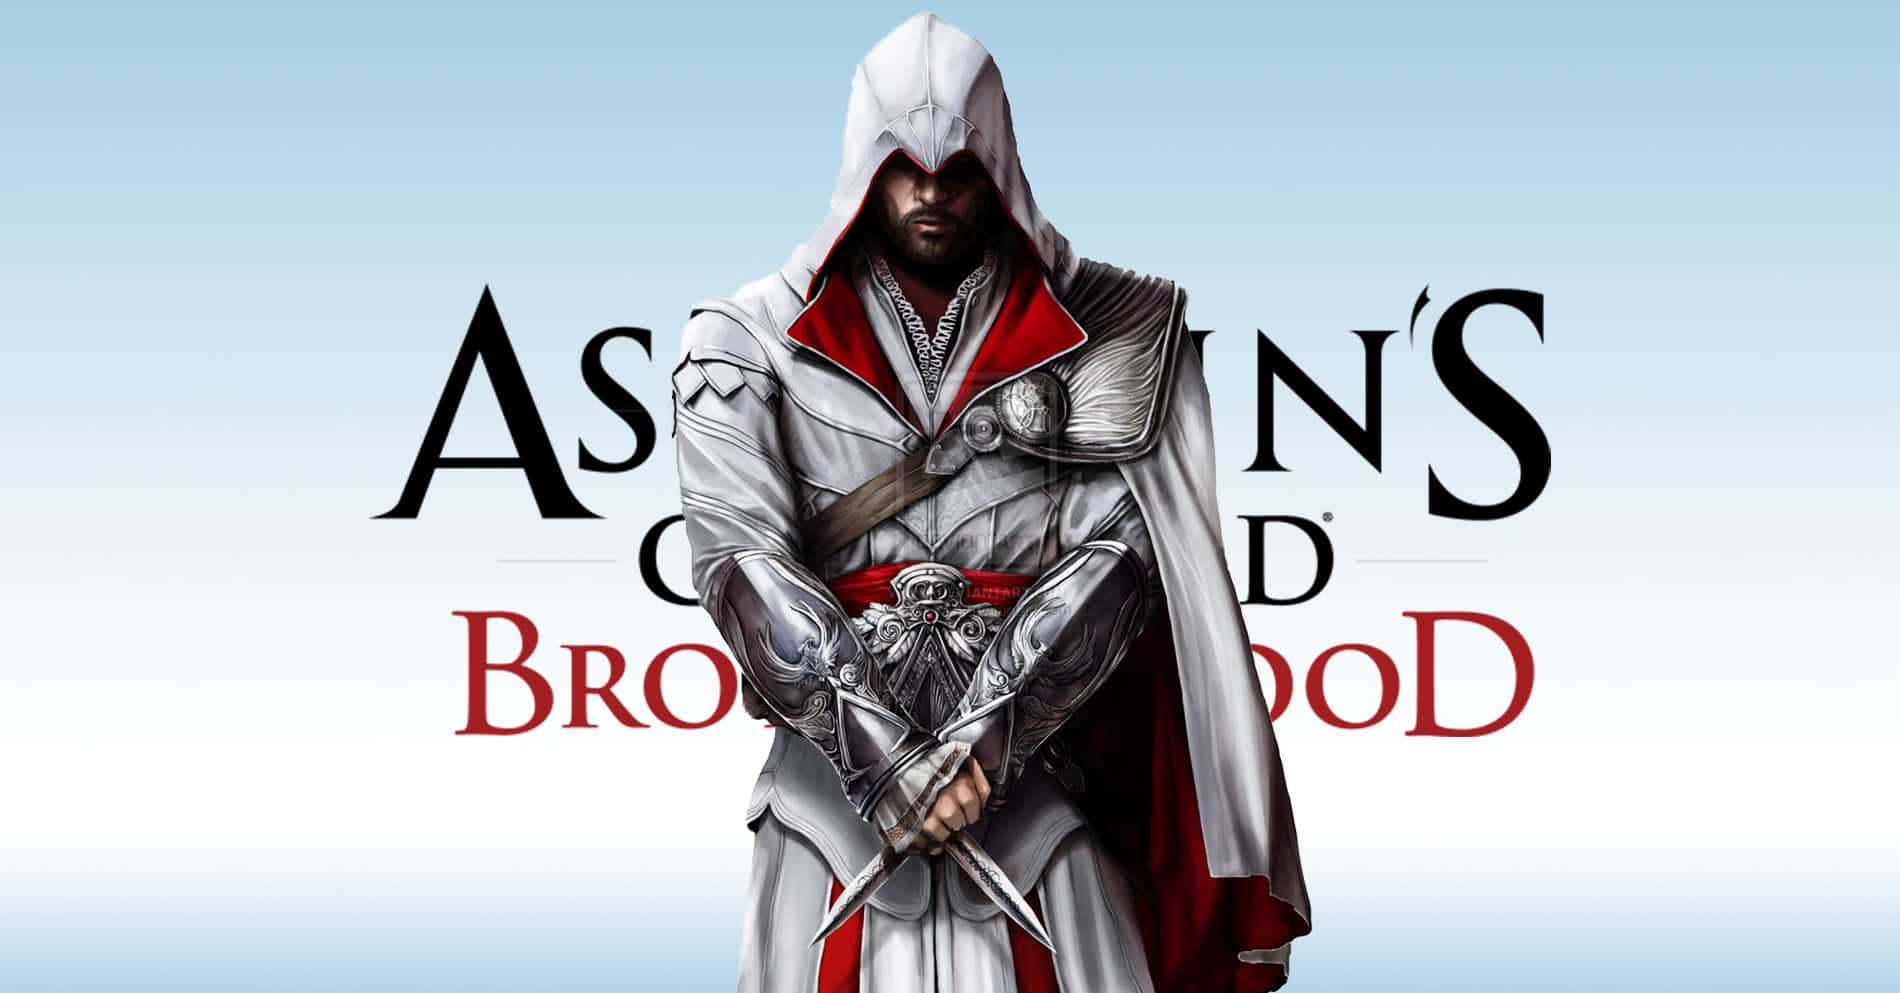 Assassin's Creed Action-Packed Adventure